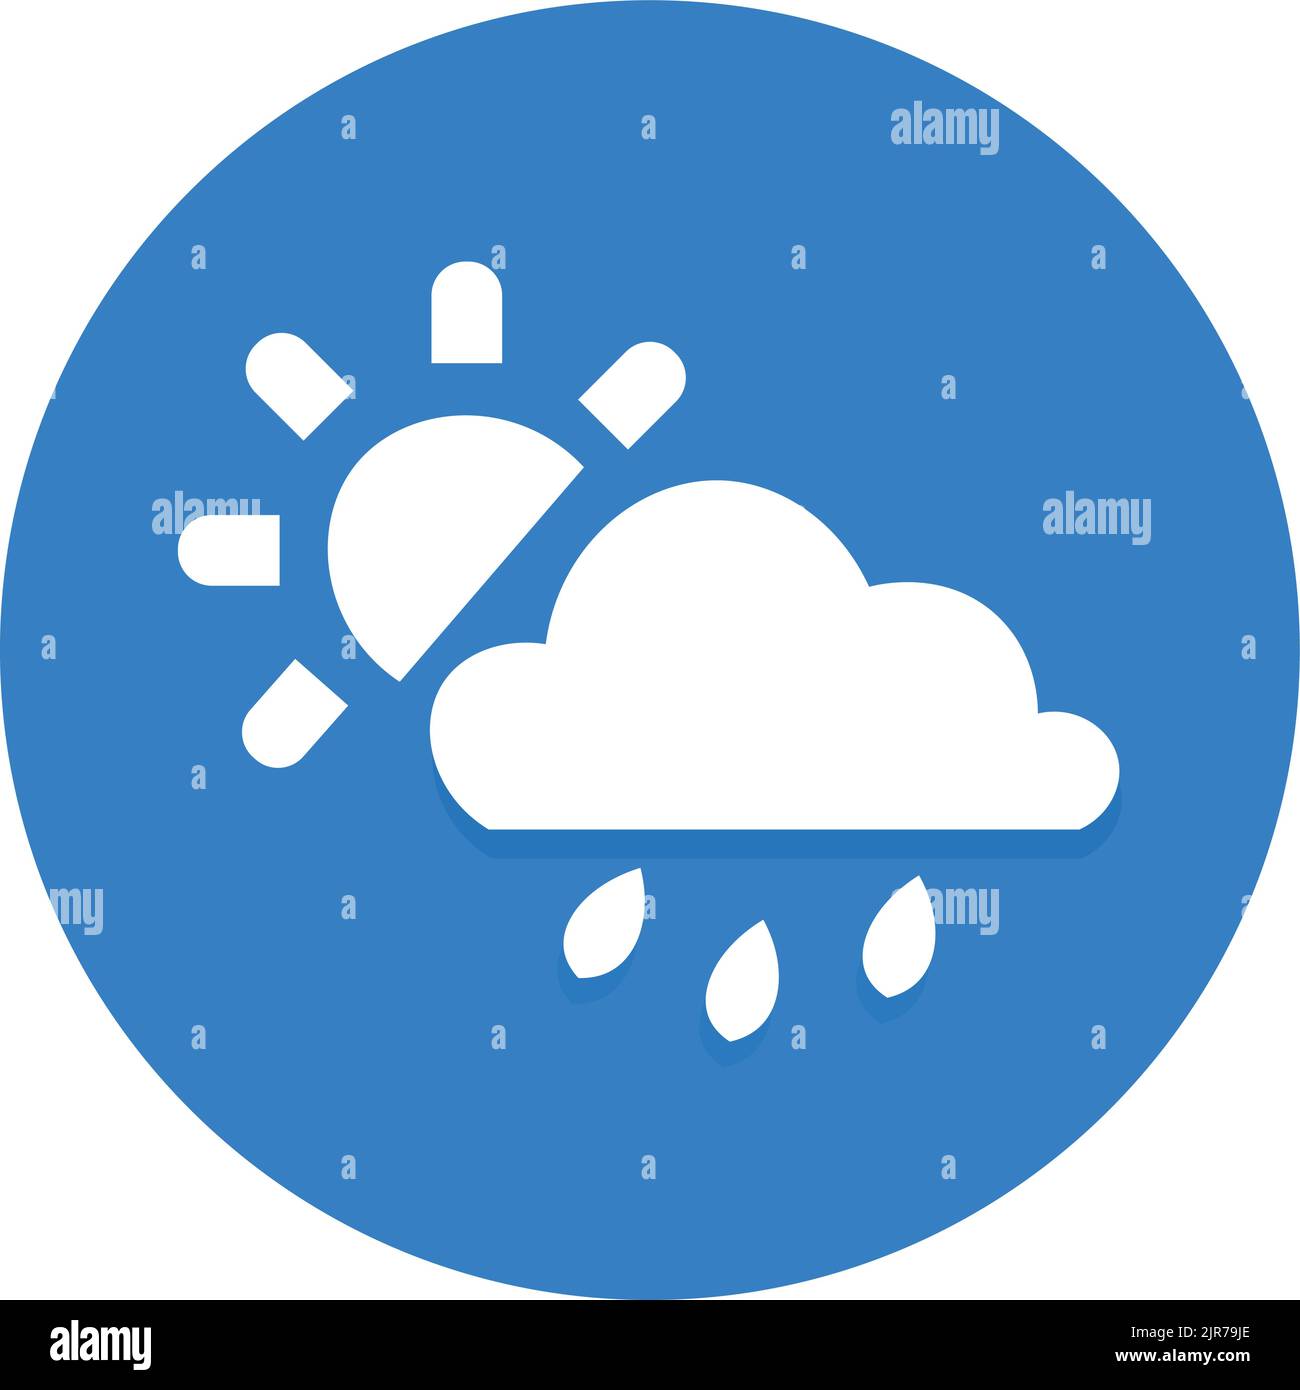 Chance of showers and partly sunny icon. Concept of weather and forecasting. Stock Vector